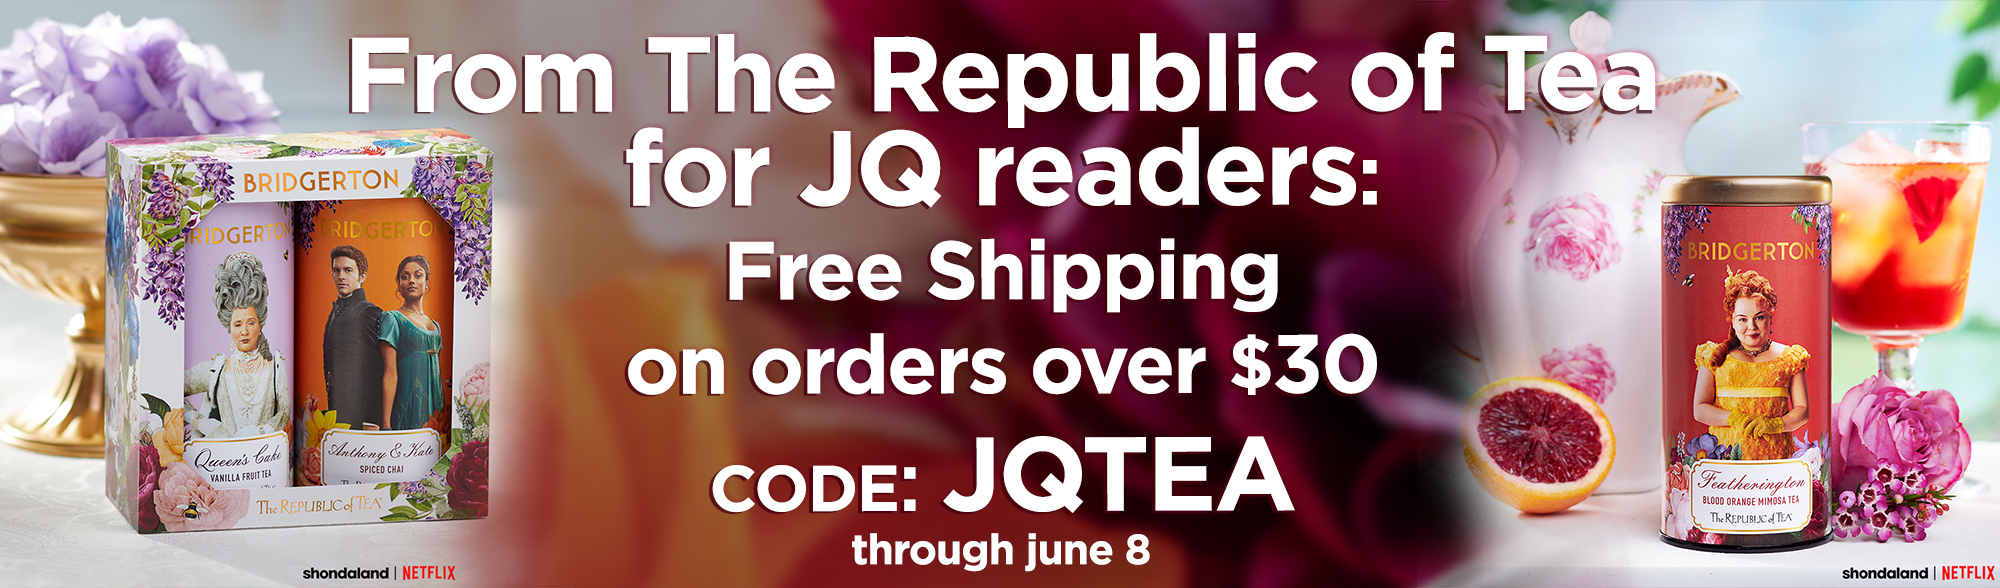 From The Republic of Tea for JQ readers: Free Shipping on orders over $30 | CODE: JQTEA | through June 8